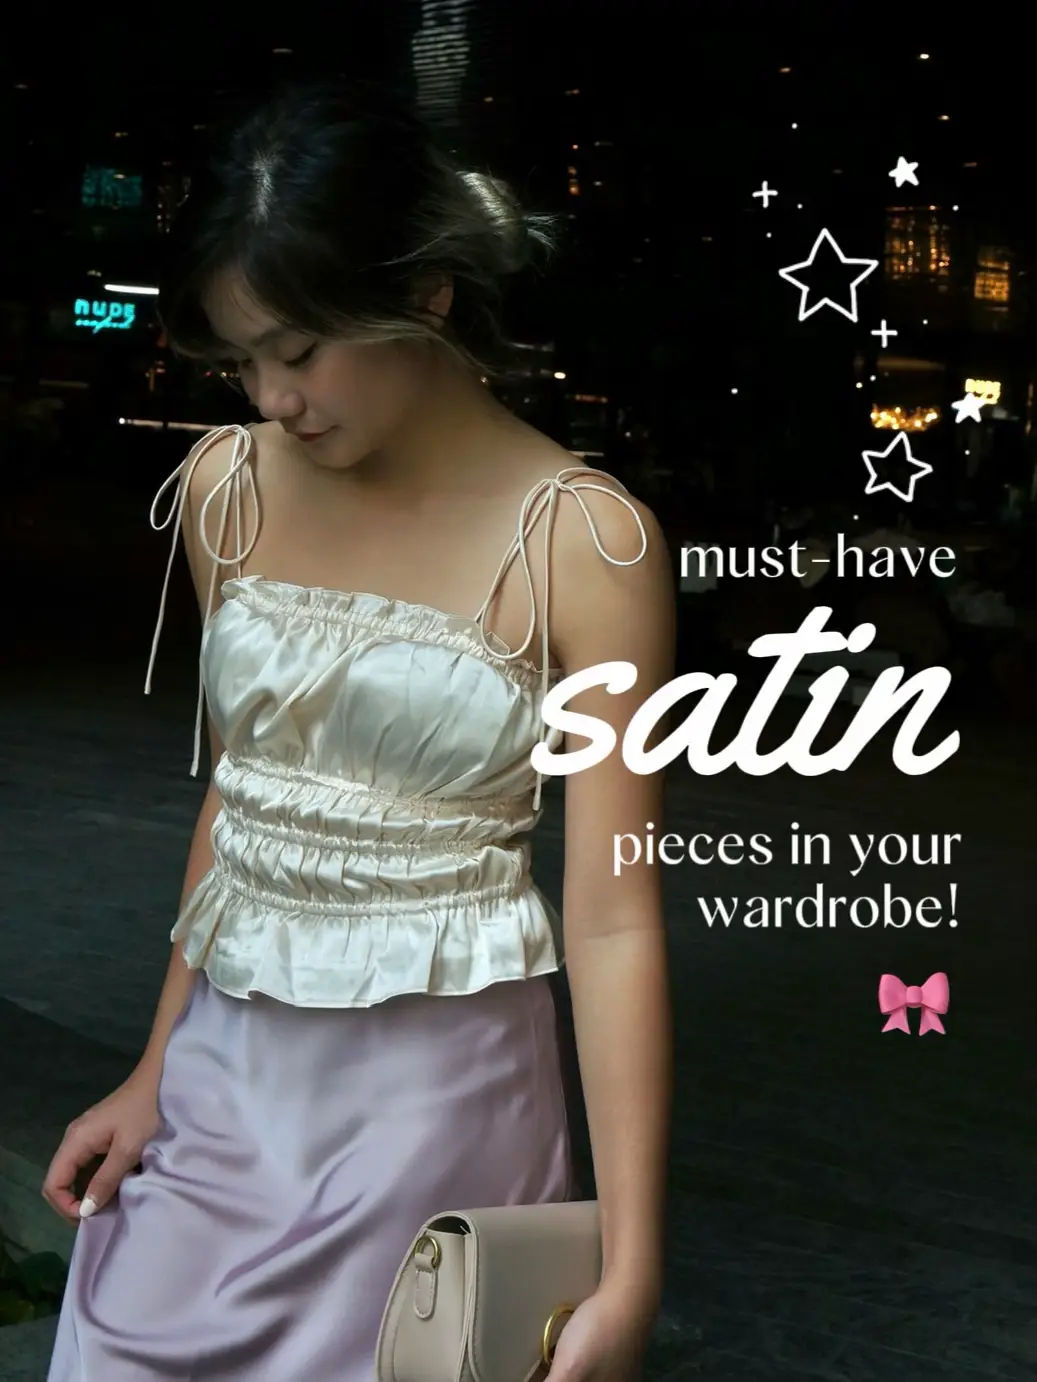 EVERY WARDROBE MUST HAVE SATIN PIECES 😍💞's images(0)